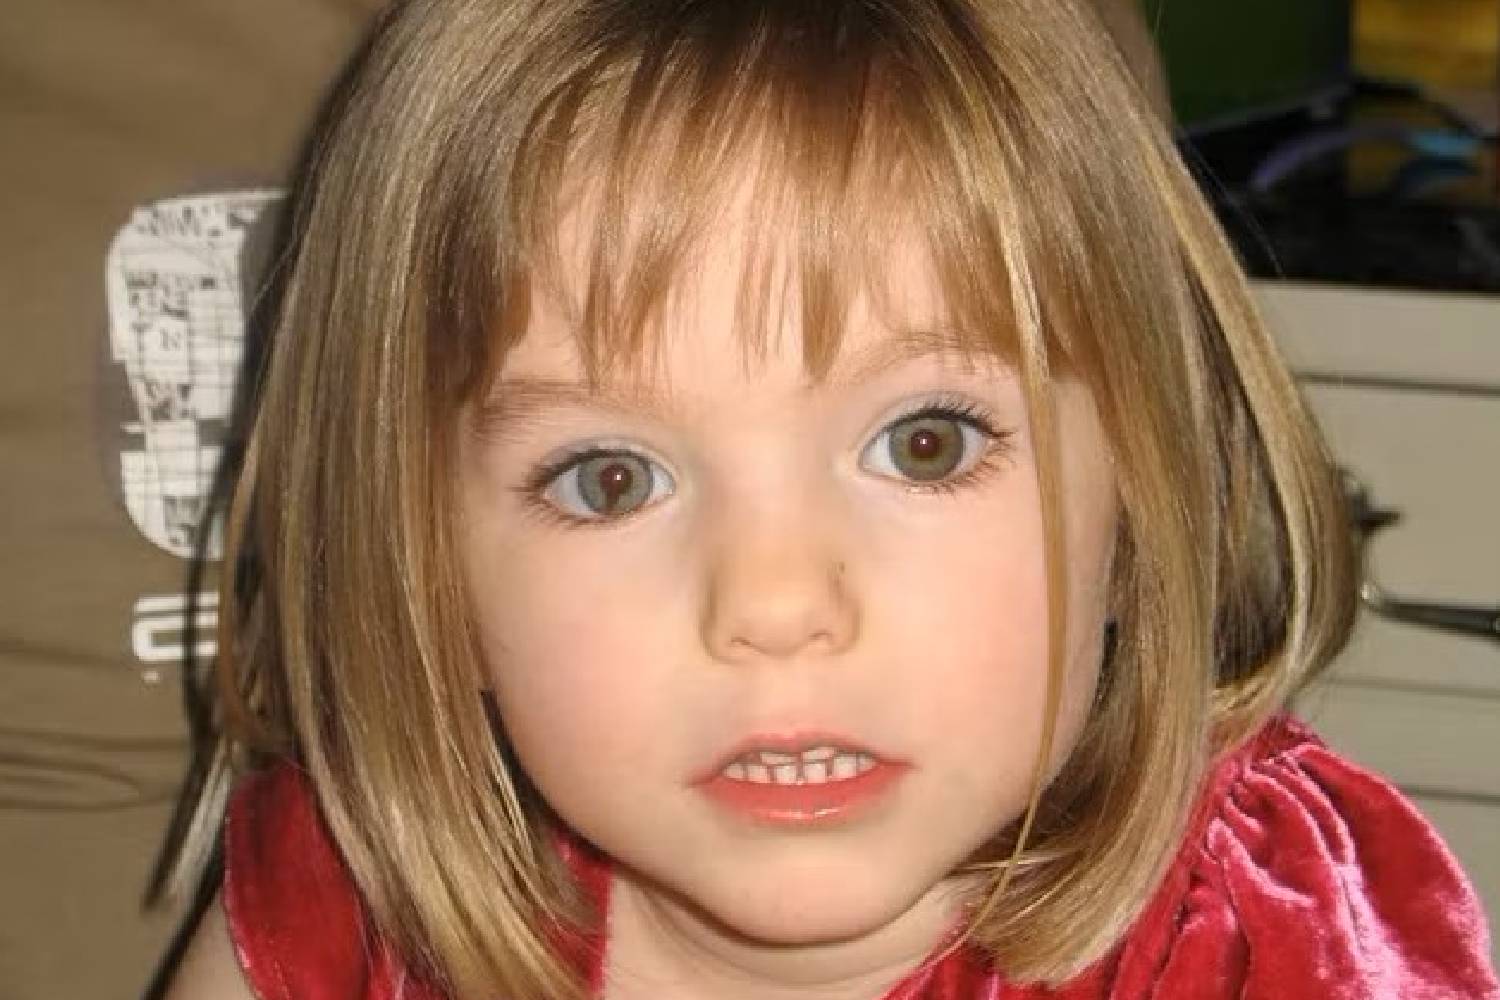 The DNA Results For Polish Woman Claiming To Be Madeleine McCann Have Been Revealed